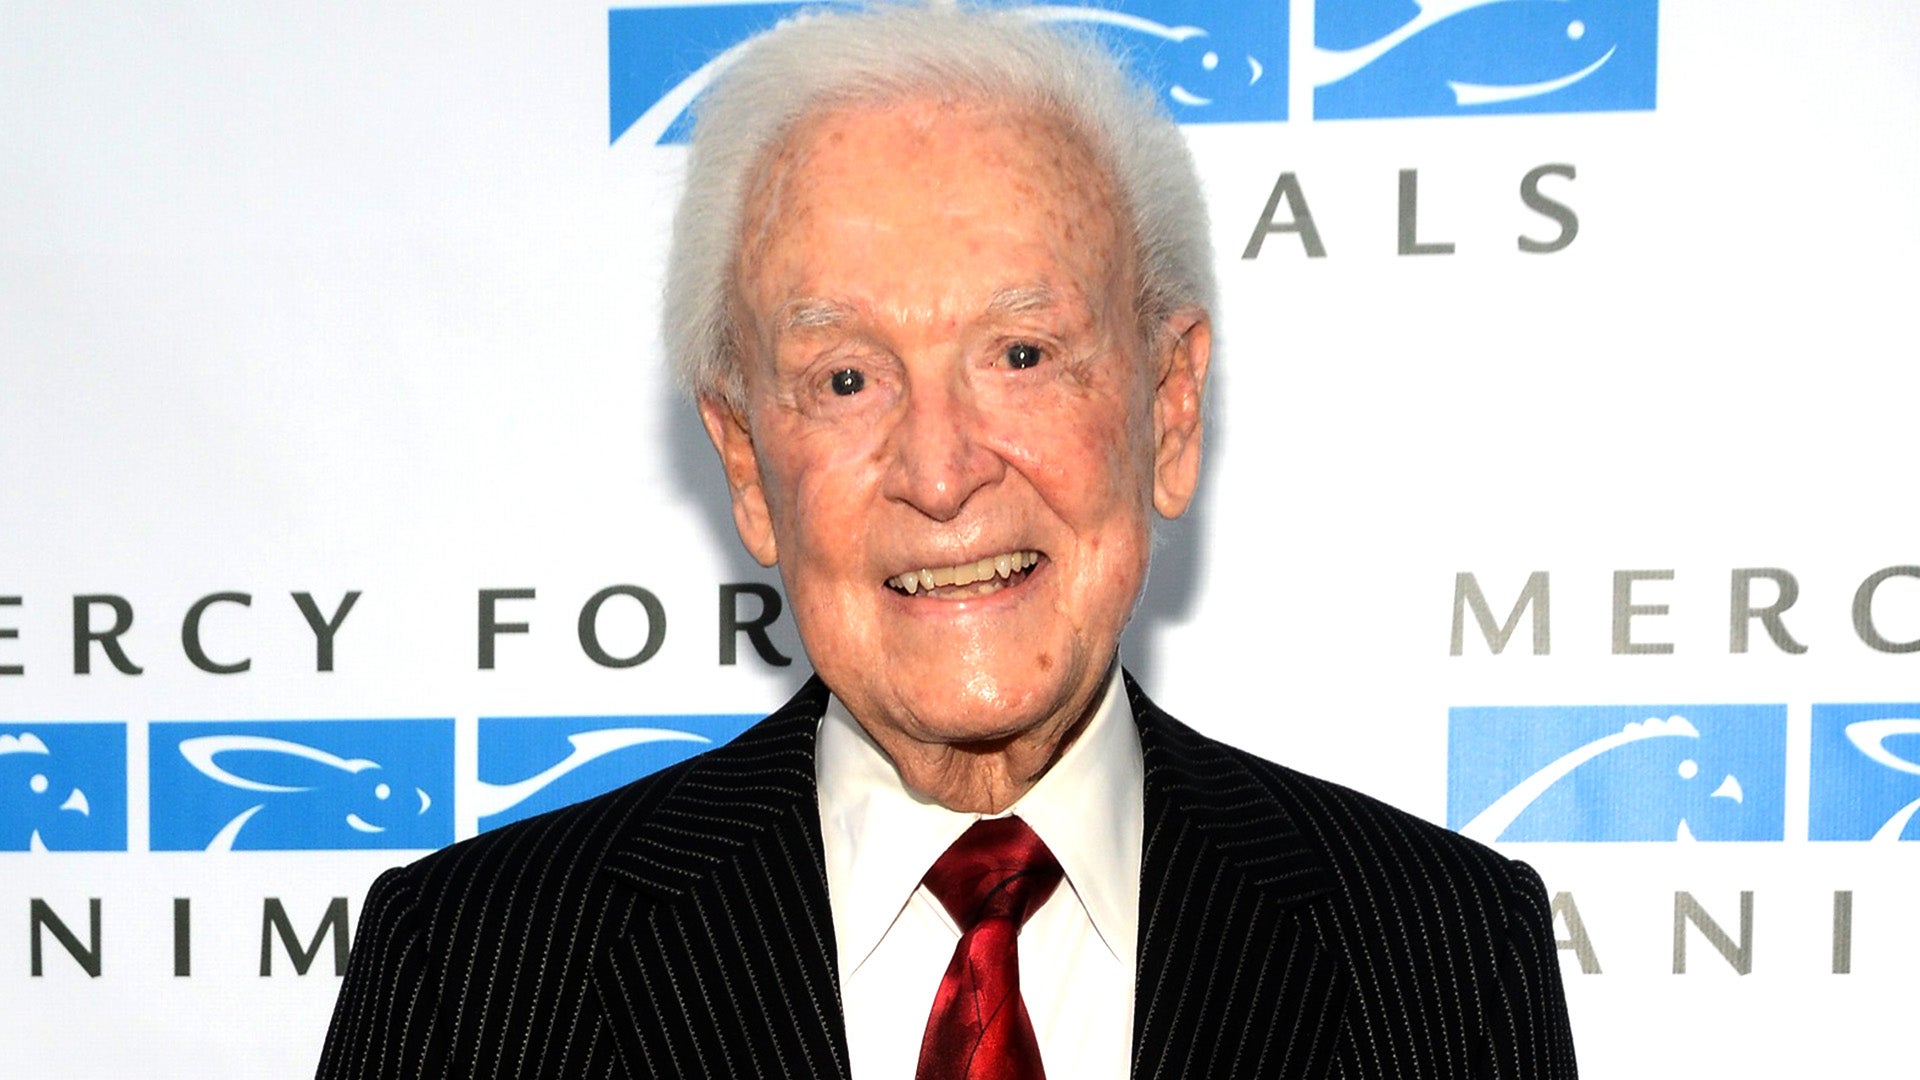 ‘Price Is Right’ Host Bob Barker’s Fortune Set to Be Donated to Non-Profit Organizations